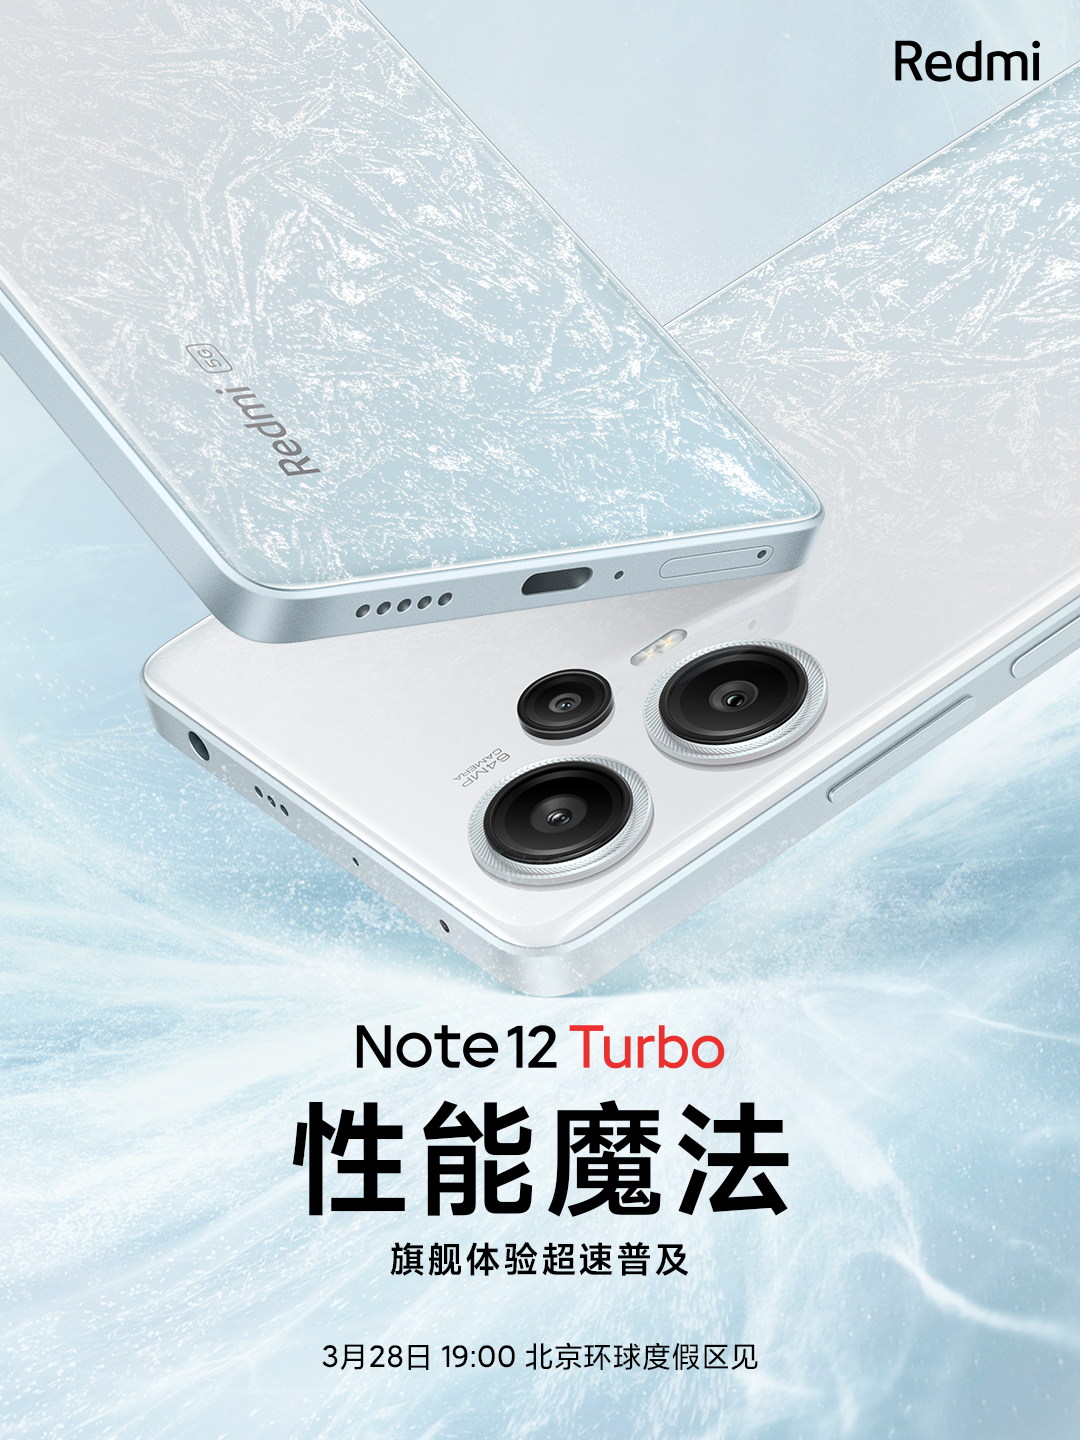 Redmi Note 12 Turbo Official Announcement